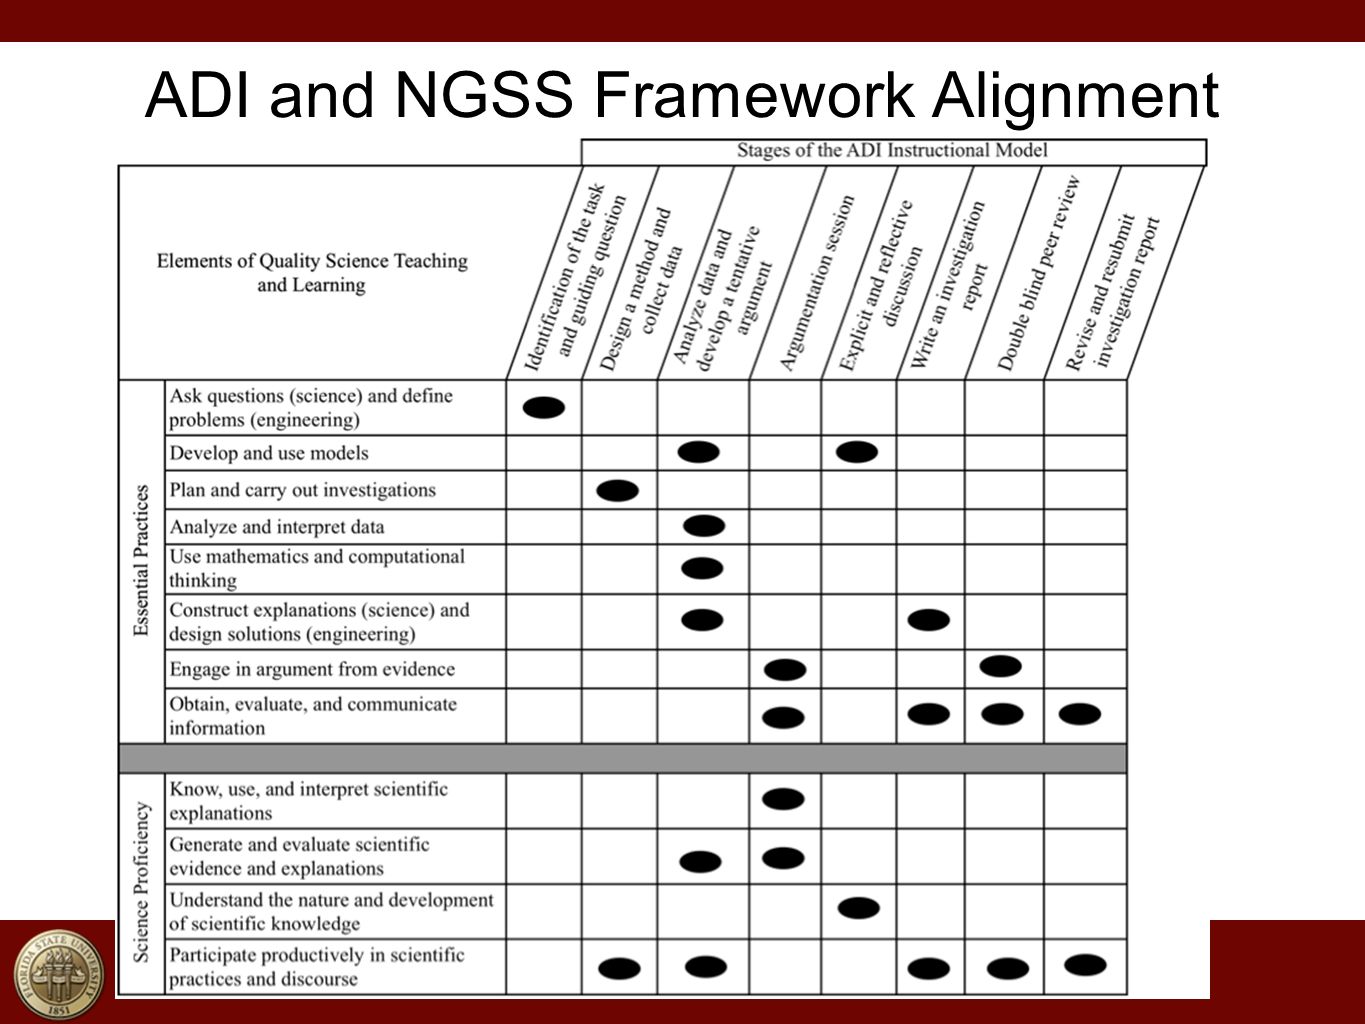 ADI and NGSS Framework Alignment